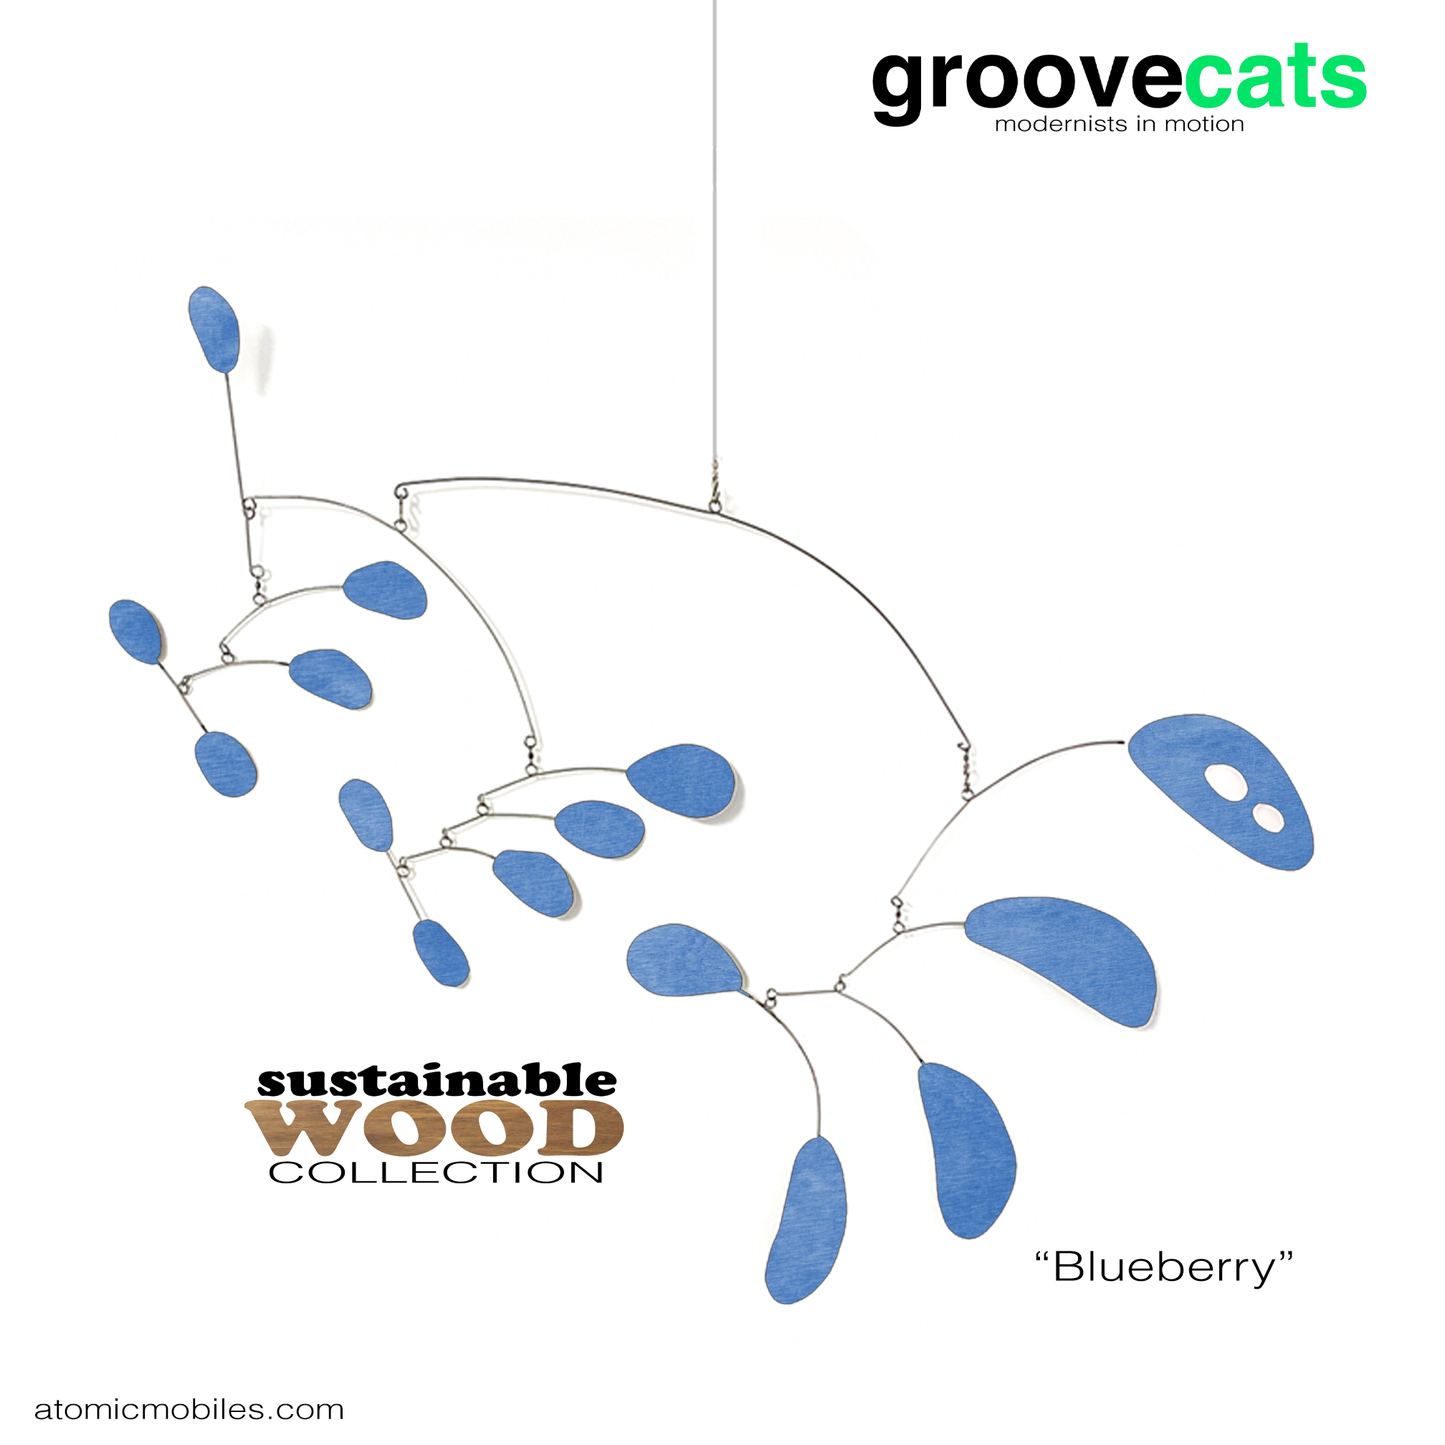 Sustainable Wood HipCat | GrooveCats Mobiles